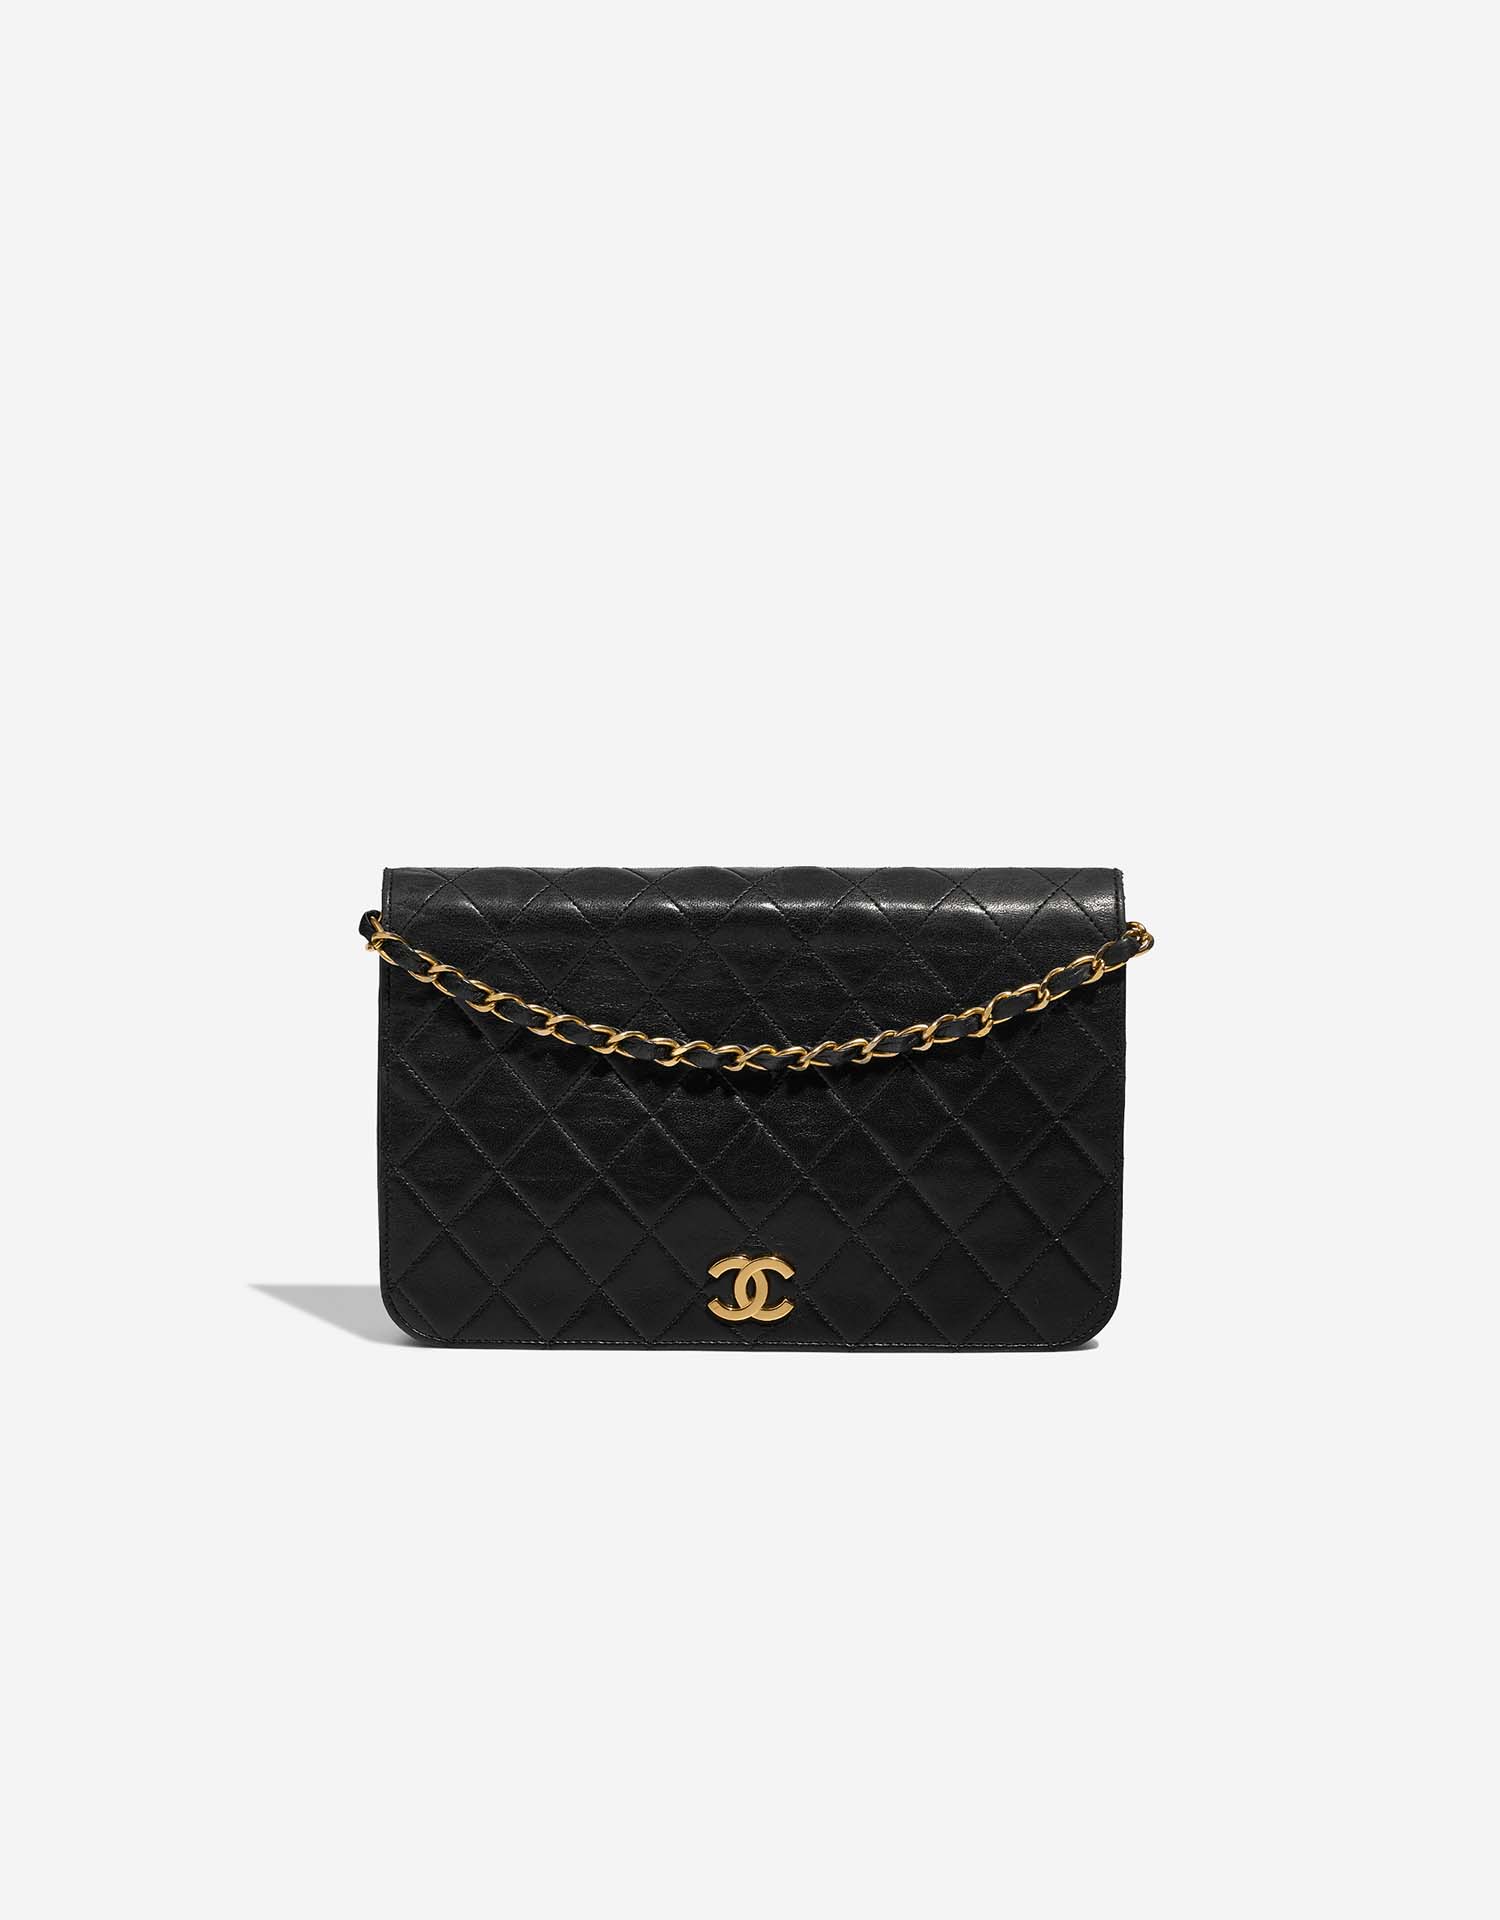 chanel black quilted